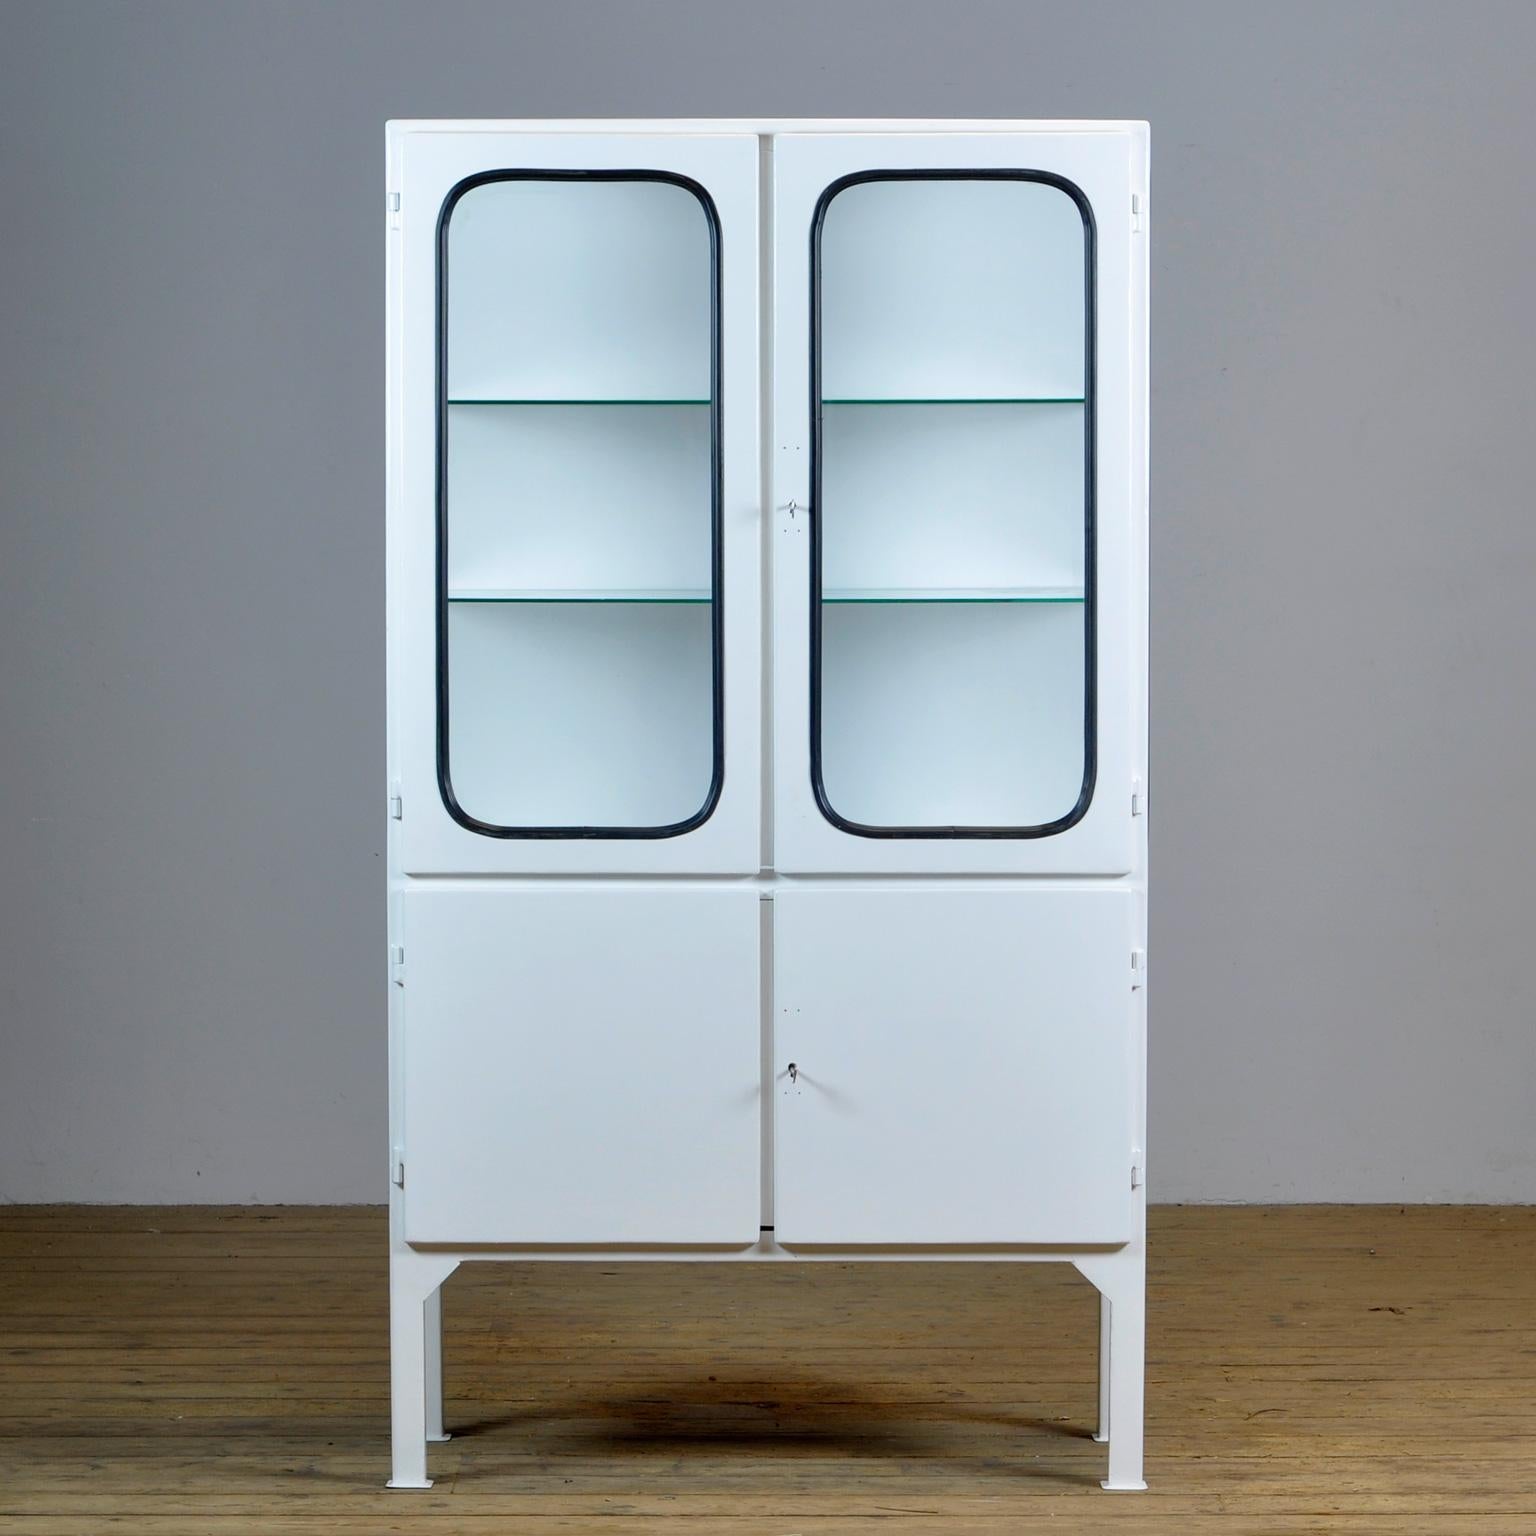 This medical cabinet was designed in the 1970s and was produced circa 1975 in hungary. It is made from iron and glass, and the glass is held by a black rubber strip. The cabinet features two adjustable glass shelves and functioning locks.